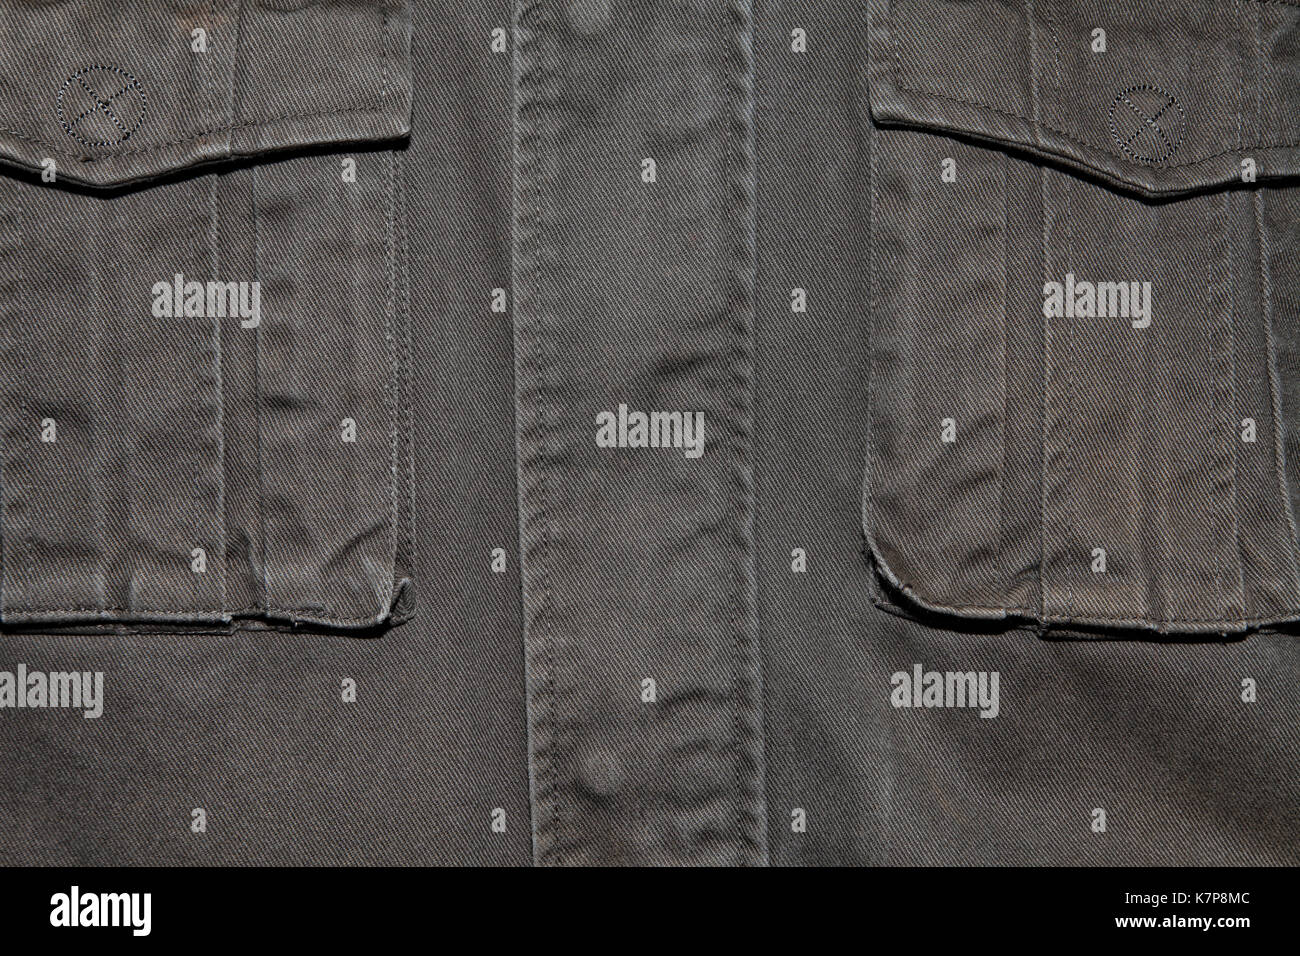 A jacket pockets. Backgrounds and textures. Stock Photo